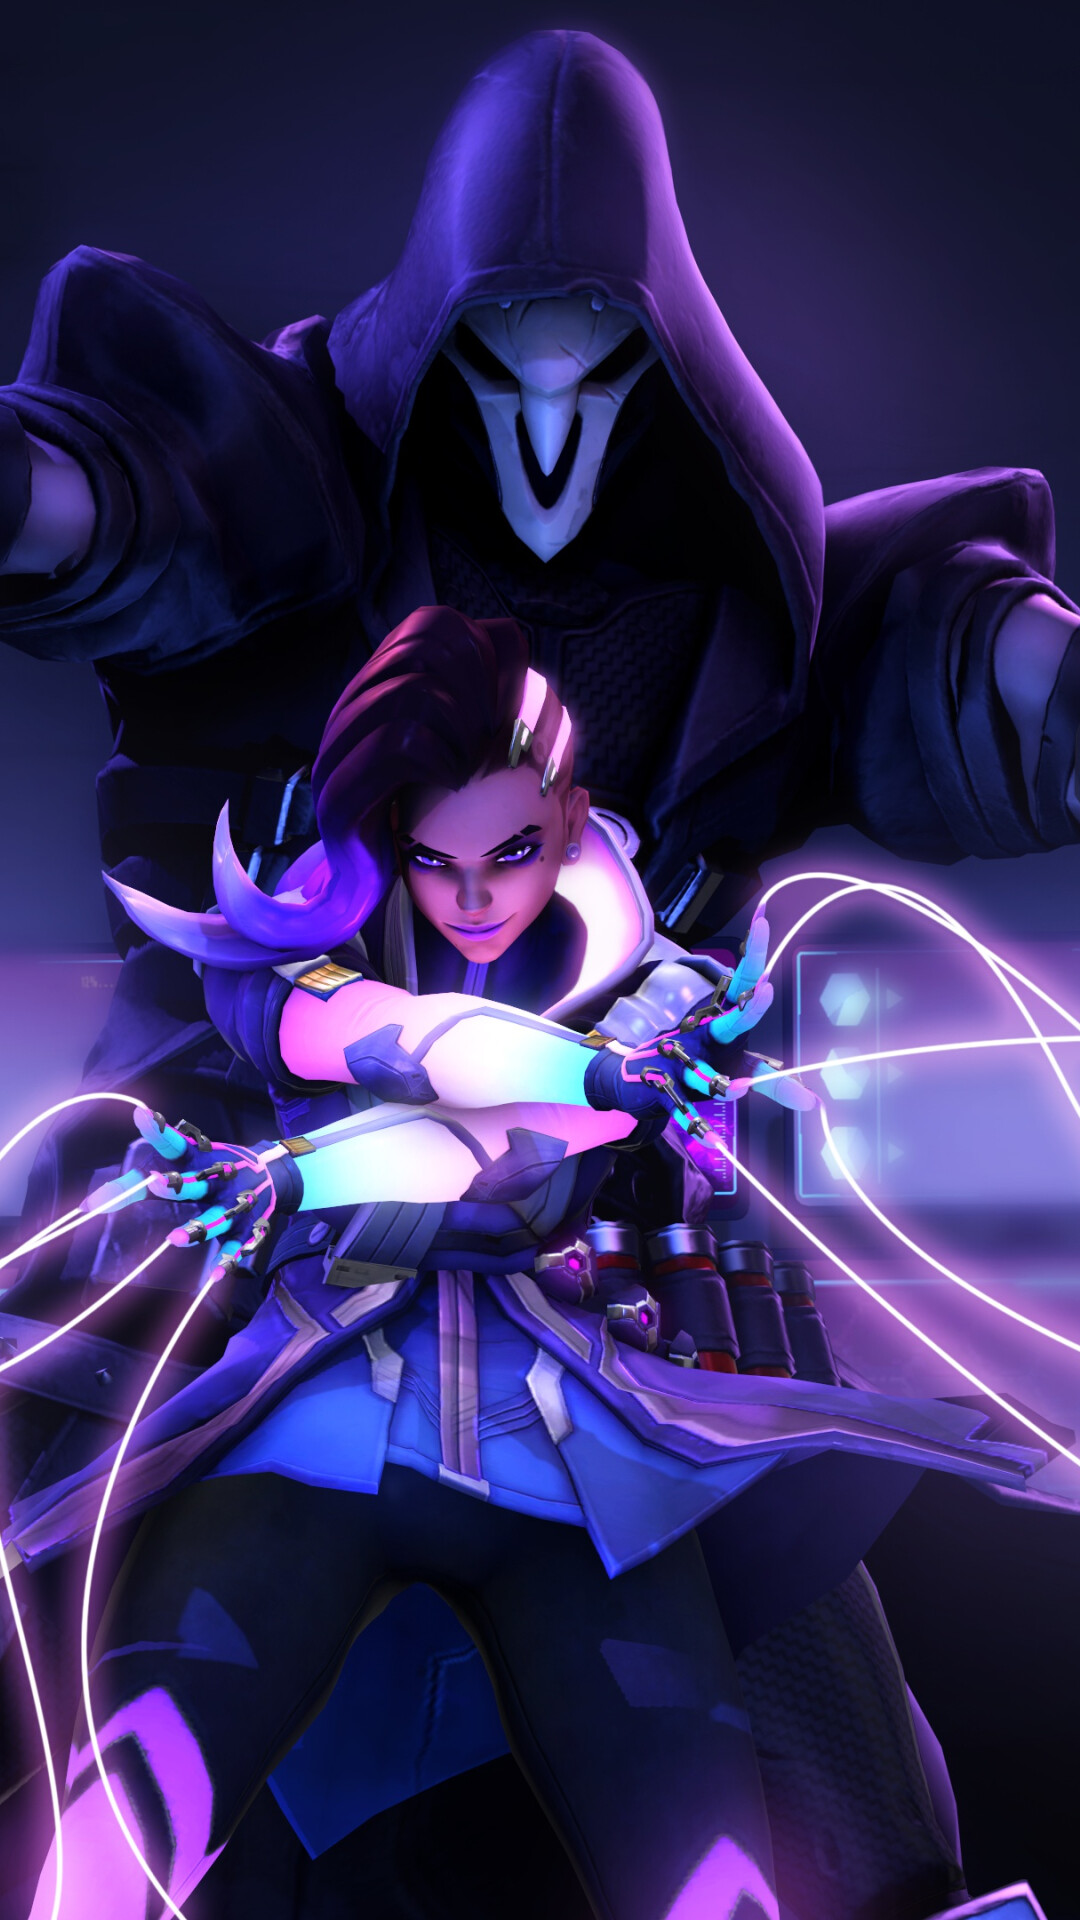 Overwatch: Reaper and Sombra, Blizzard Entertainment. 1080x1920 Full HD Wallpaper.